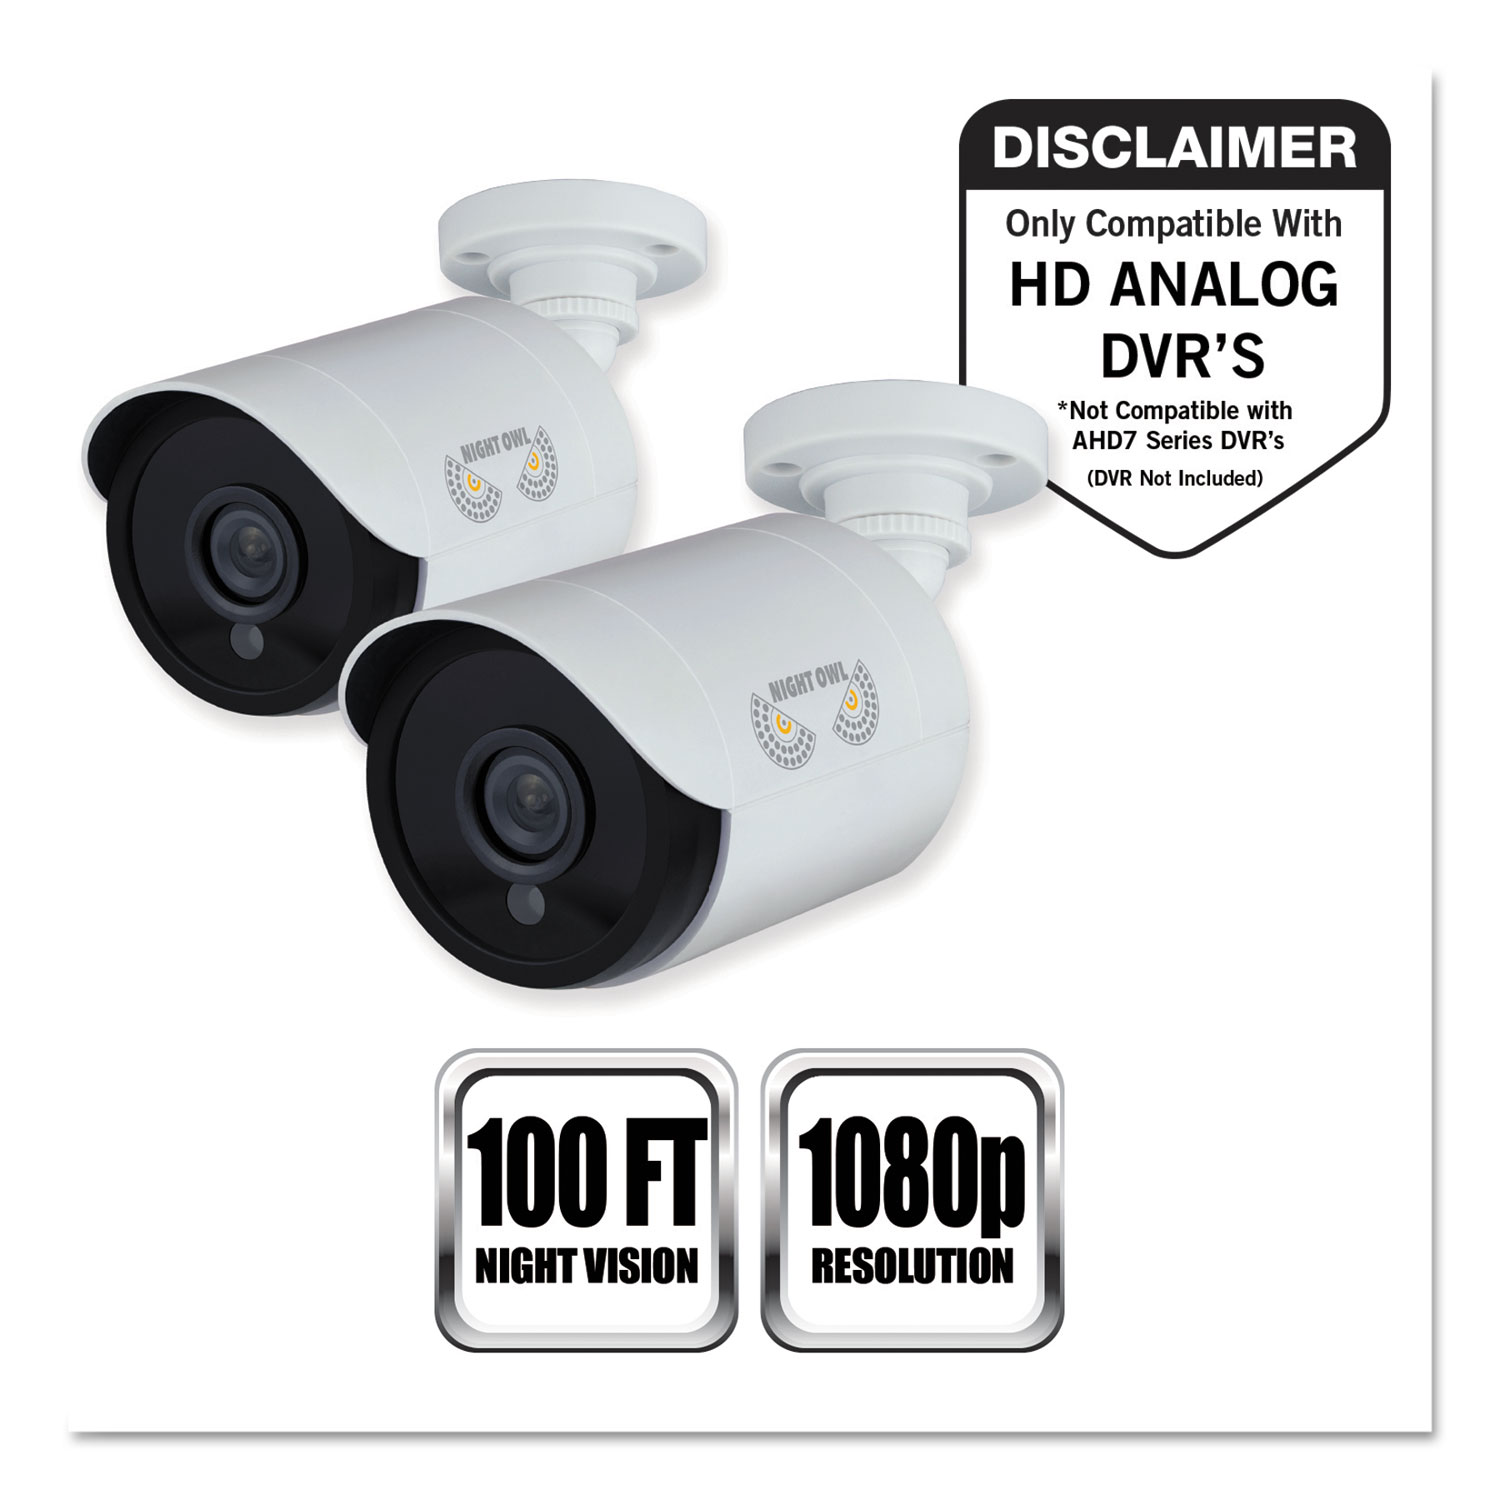 Add-On HD Wired Security Bullet Cameras,1080p Resolution, 2/PK